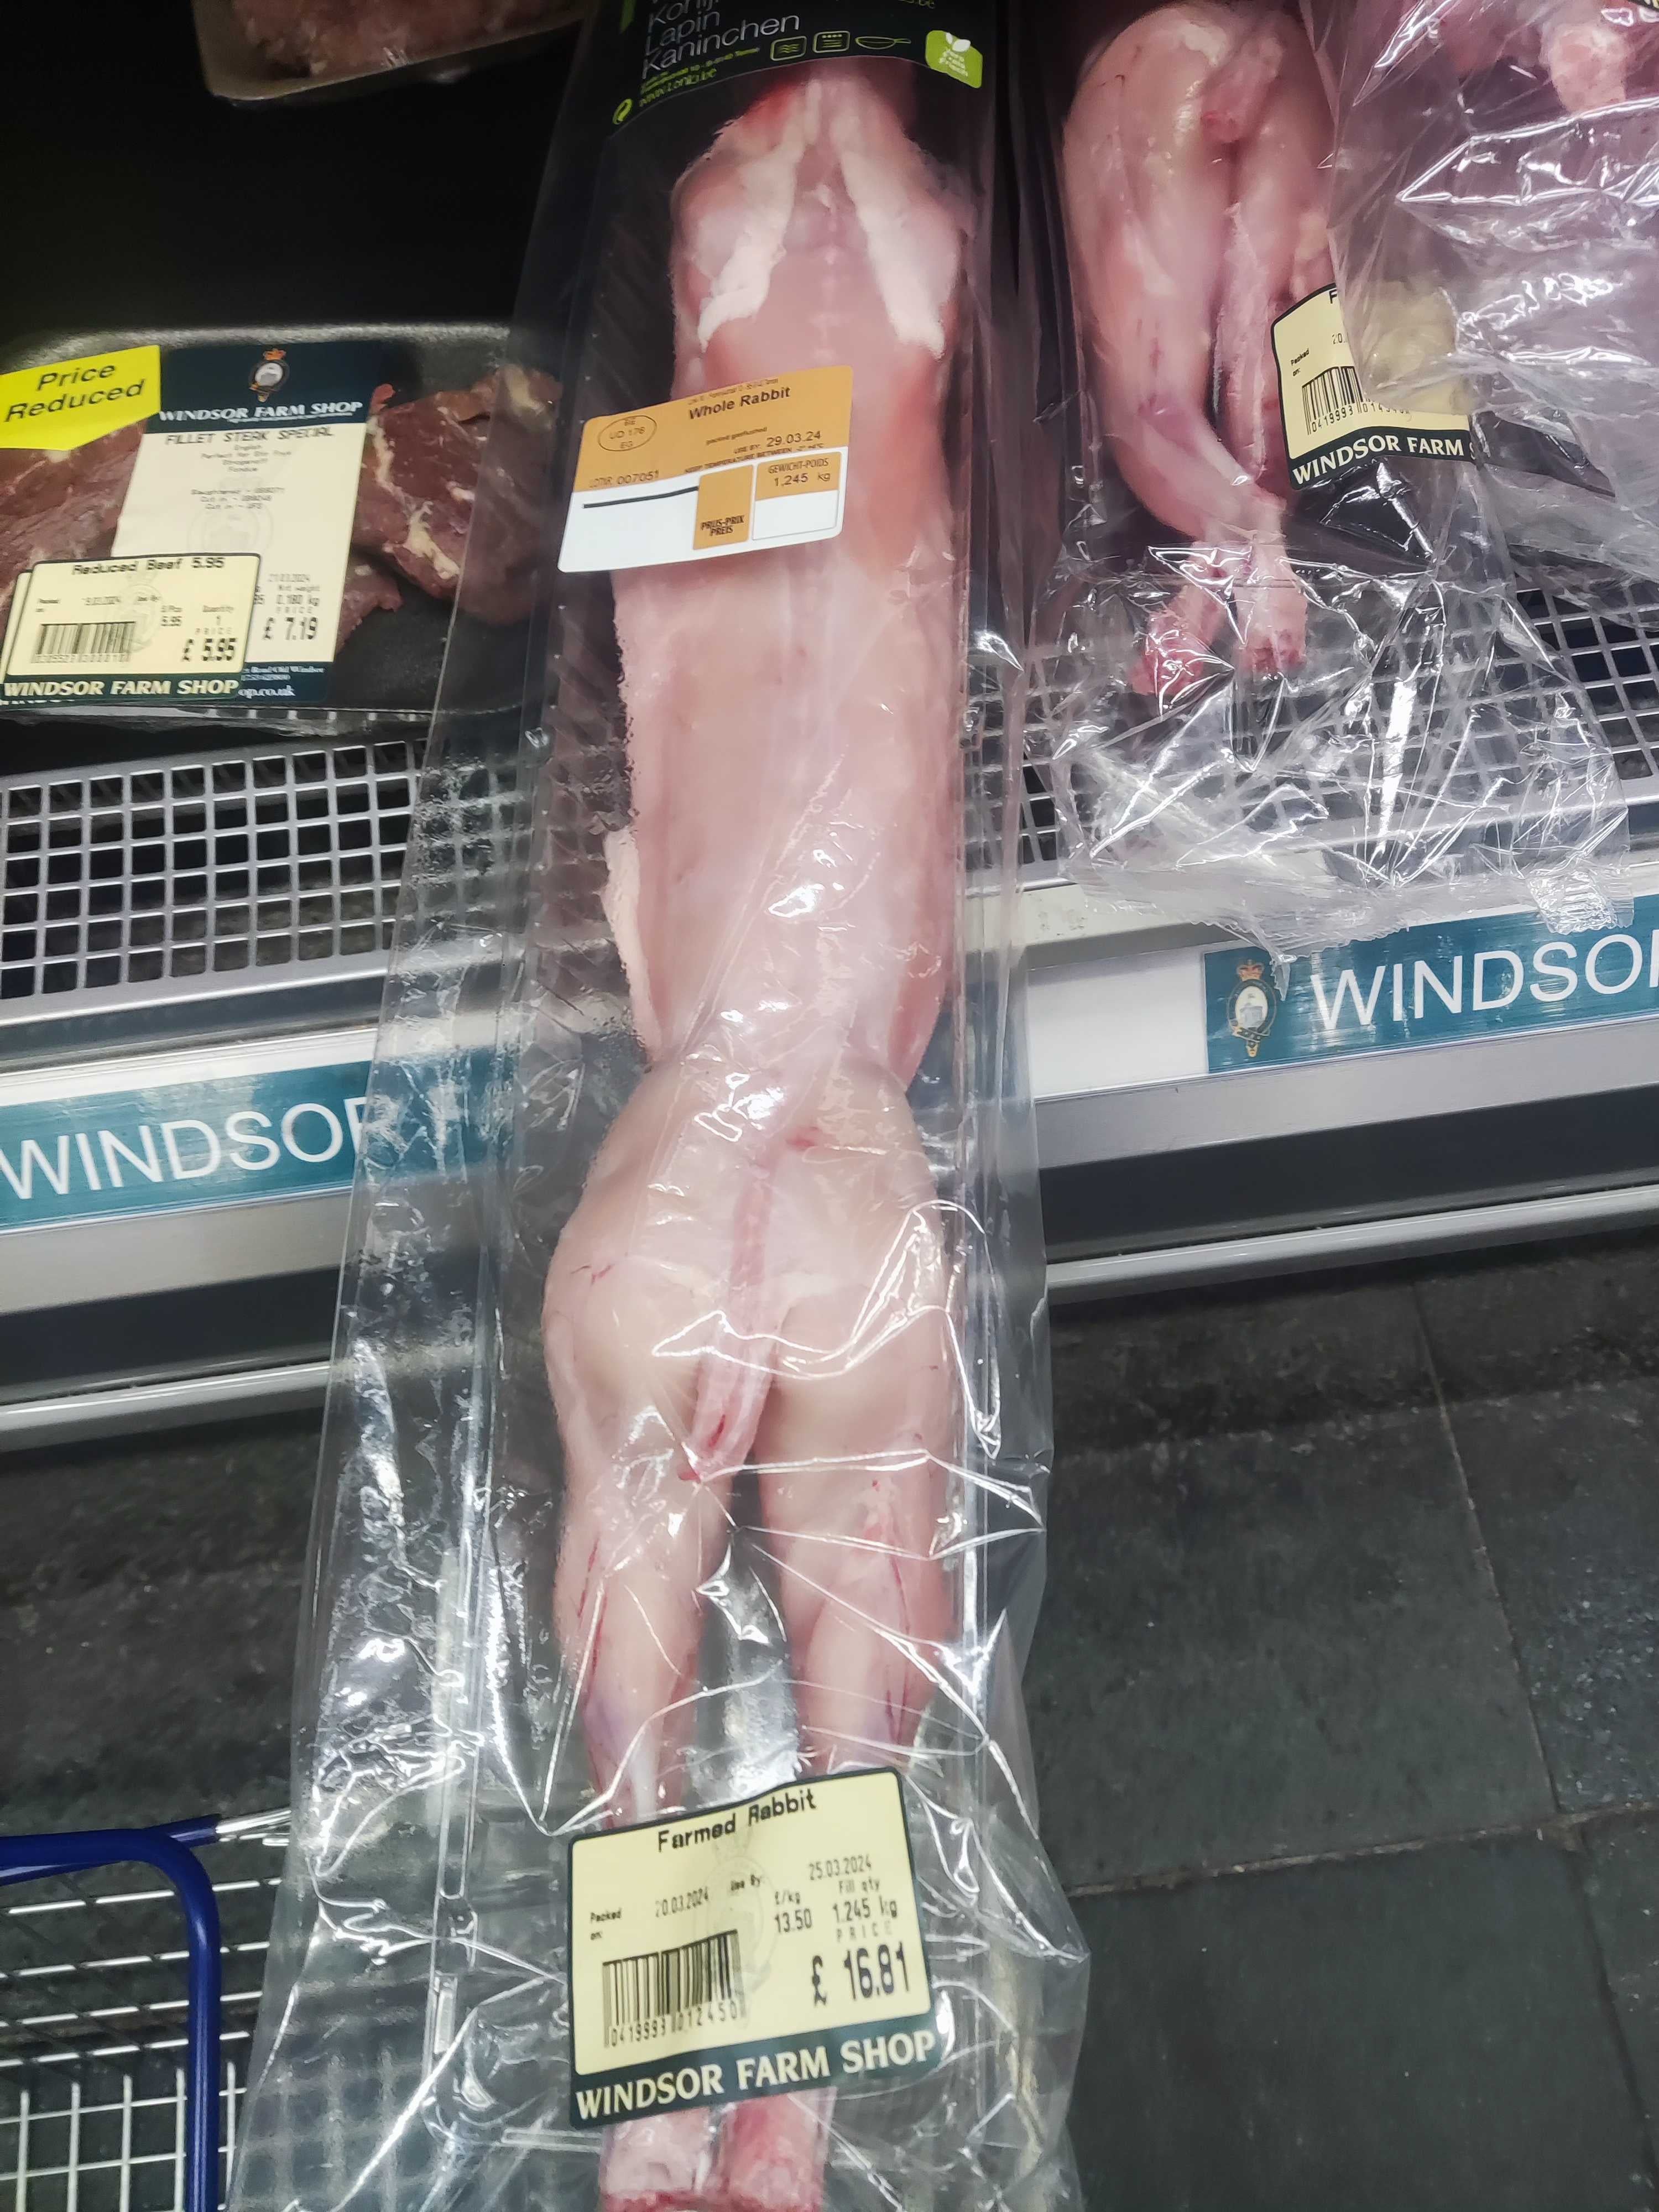 A whole skinned rabbit for less than a pony